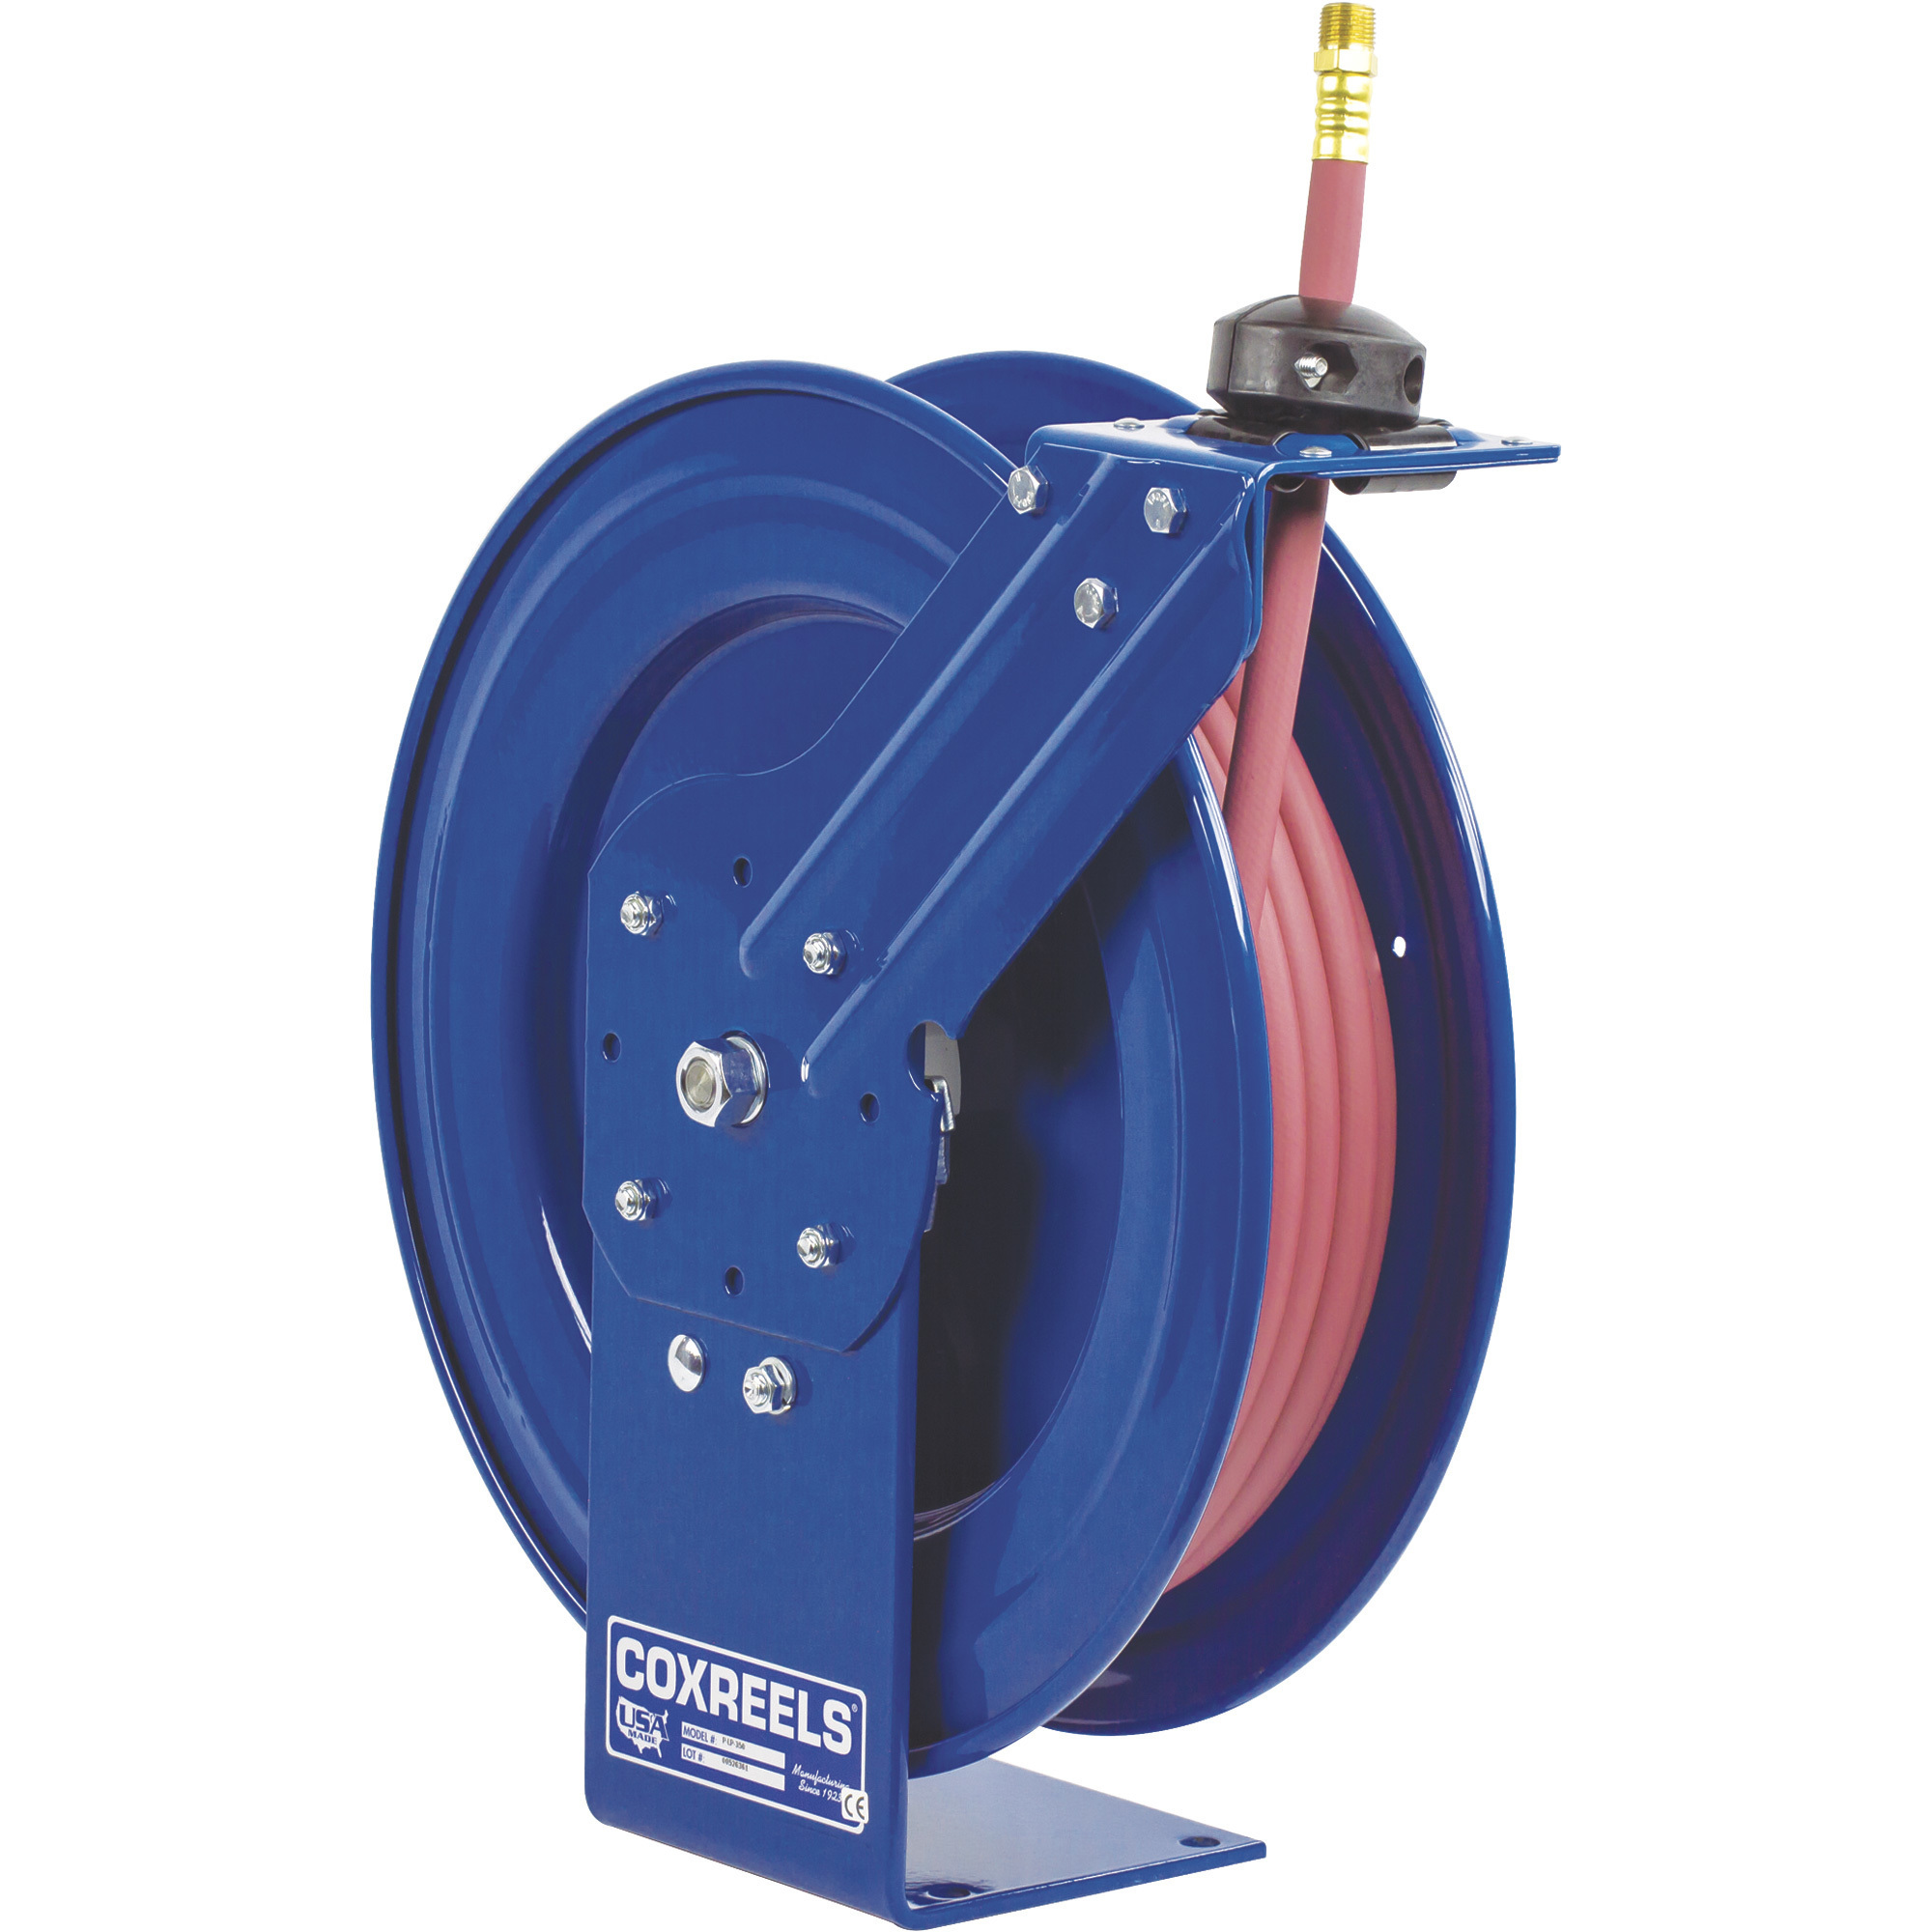 Coxreels P Series Air/Water Hose Reel, With 1/4Inch x 50ft. PVC Hose, Max. 300 PSI, Model P-LP-150